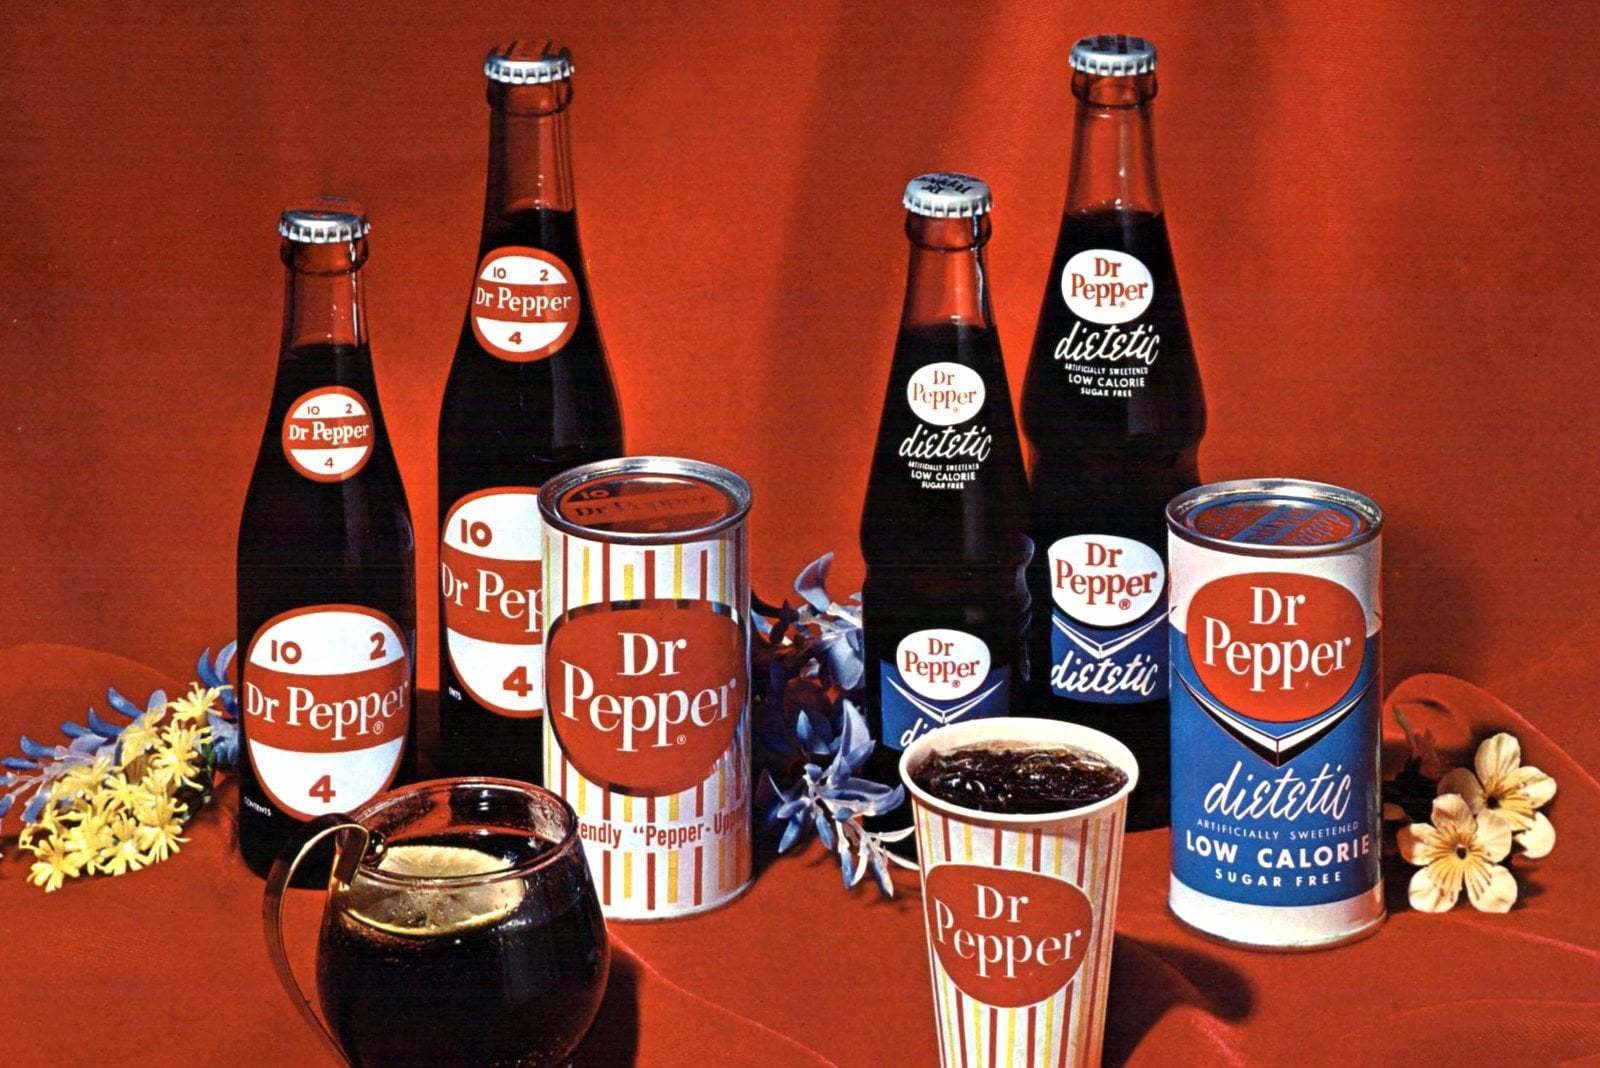 What Was Removed From Dr Pepper In The 1950s?